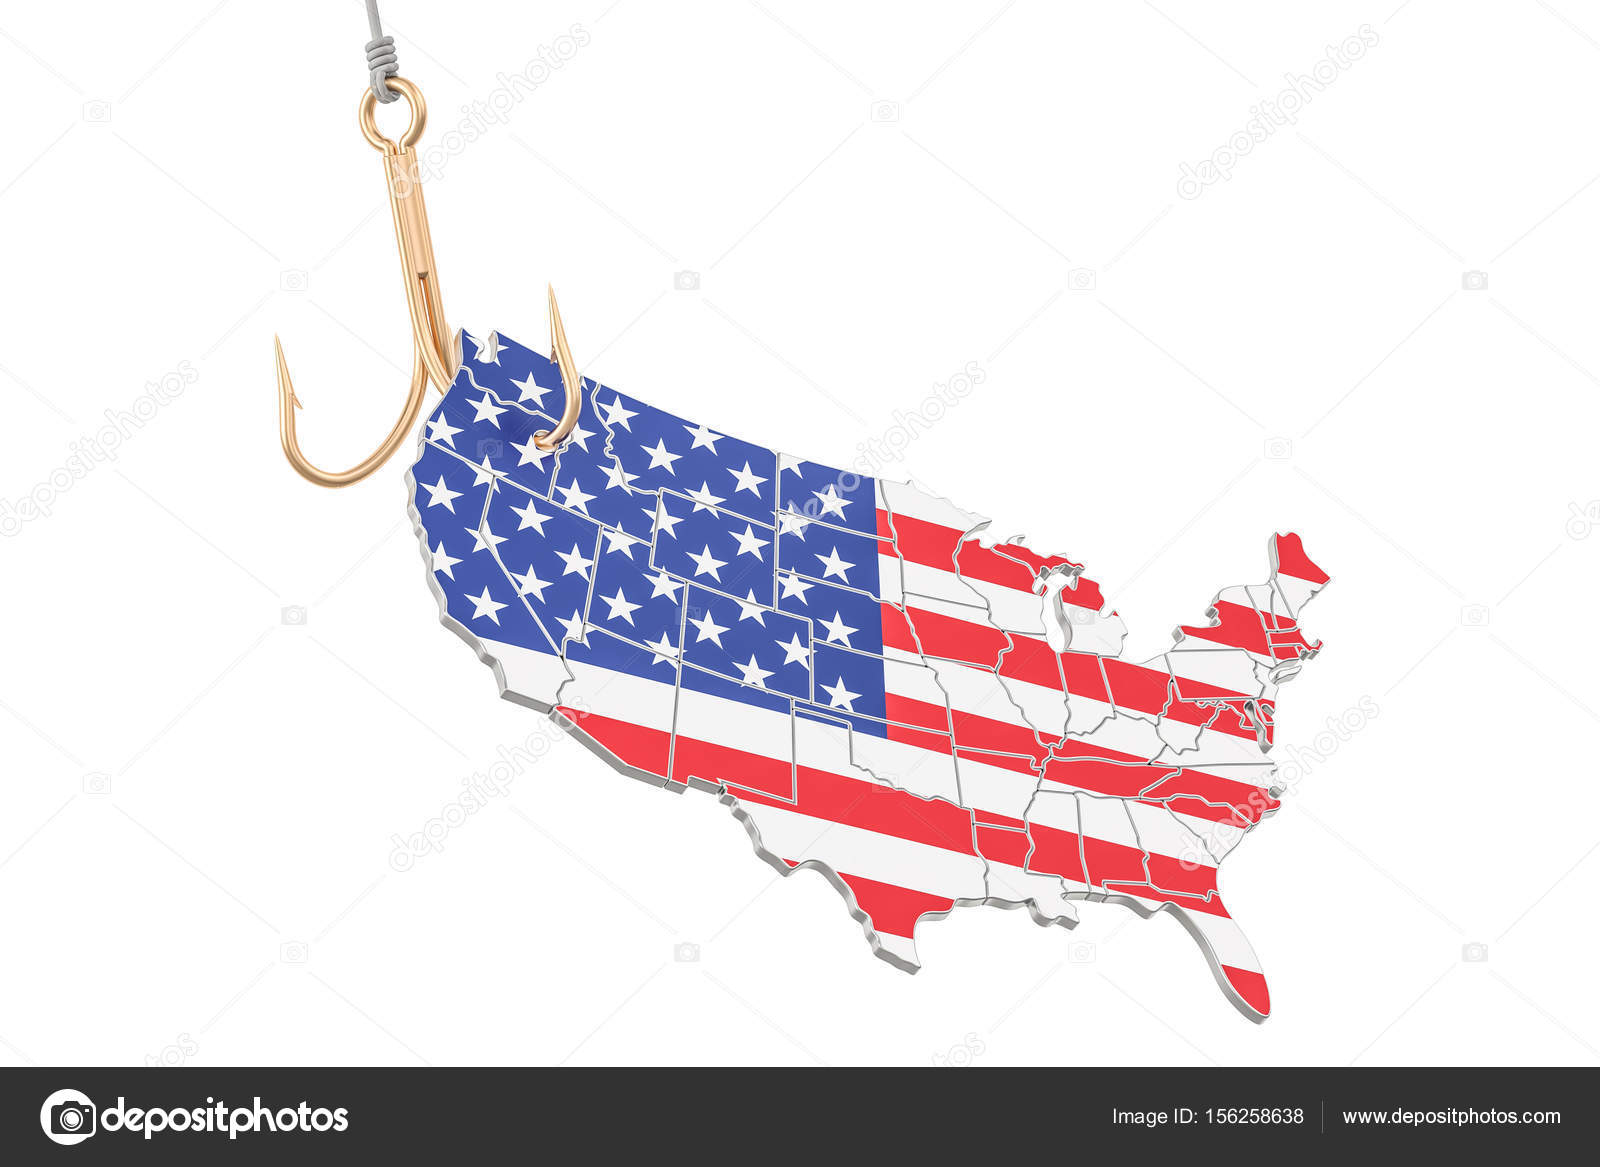 Fishing hook with map of USA, 3D rendering Stock Illustration by